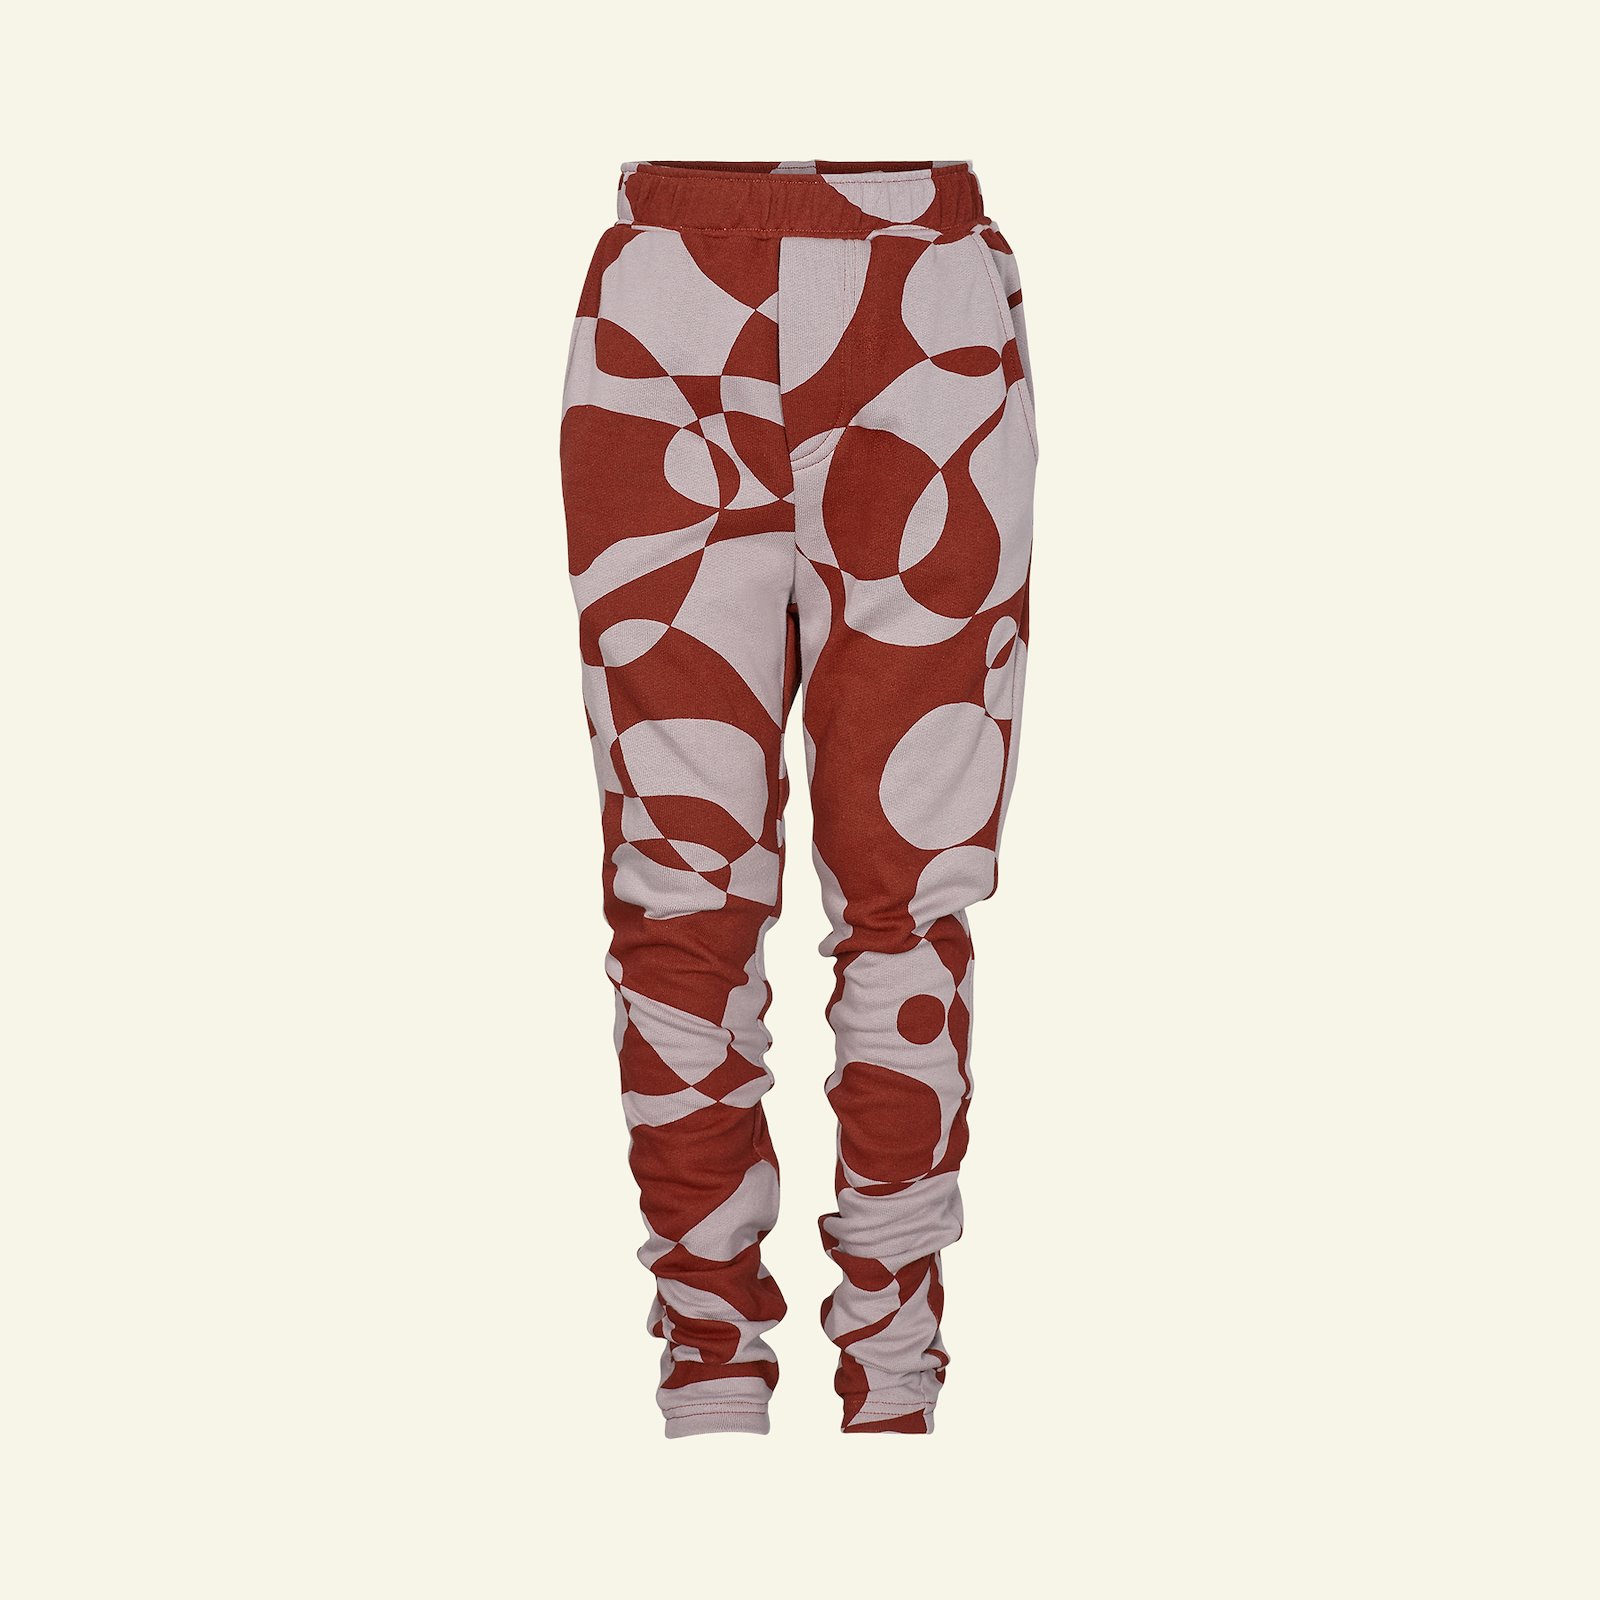 Trousers, 140/10y p60035_211818_sskit